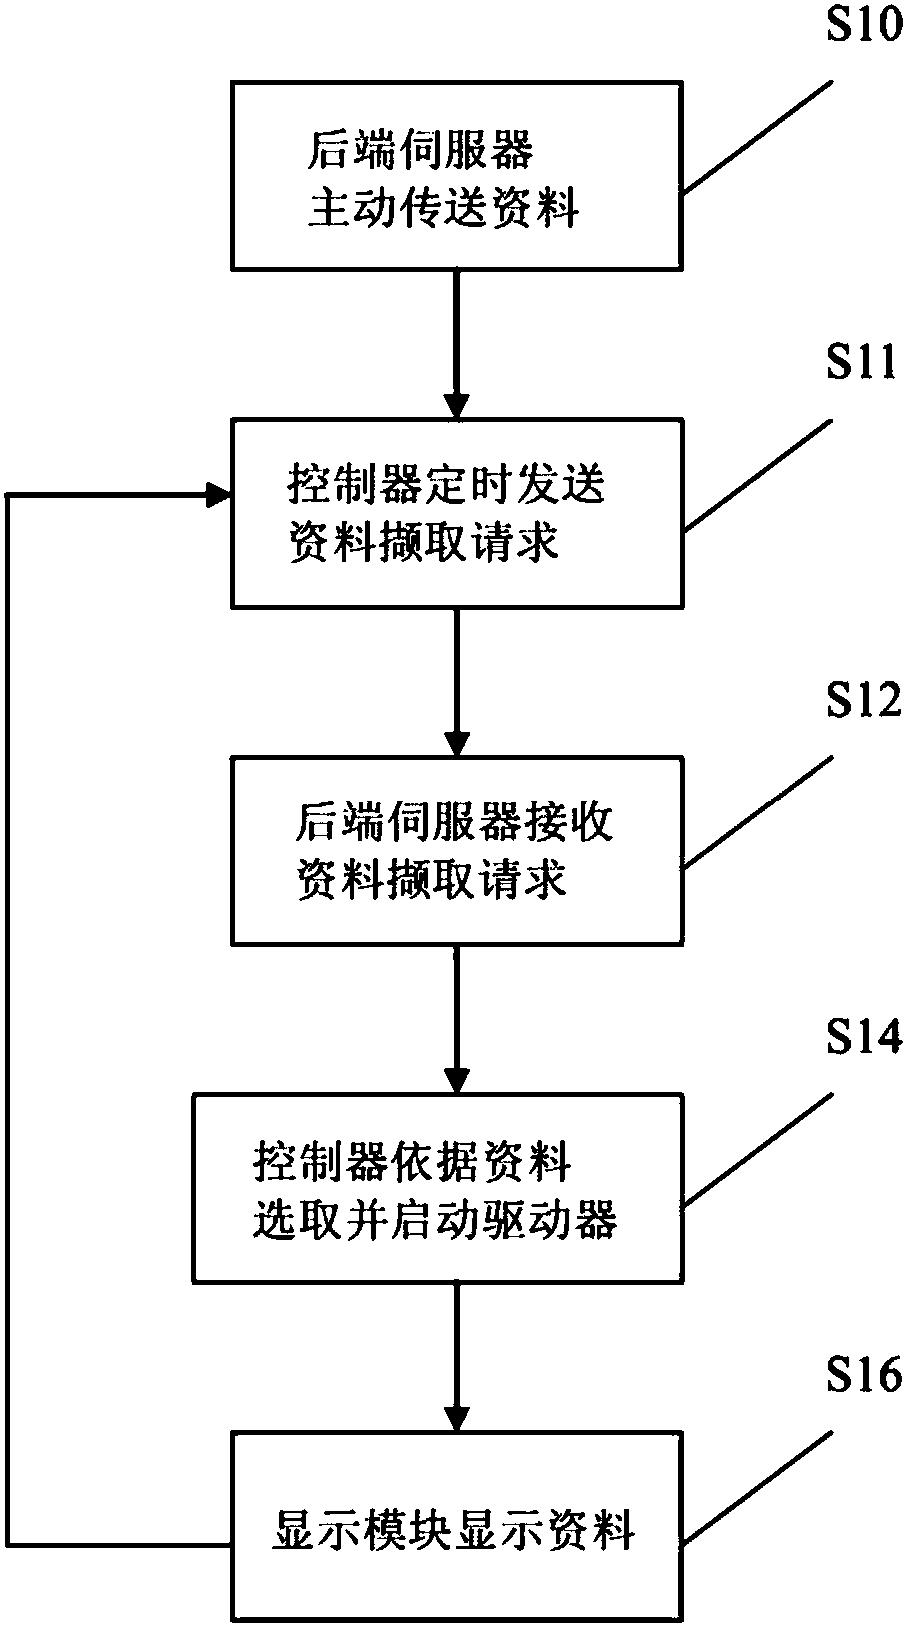 Smart bedside card and control management system thereof